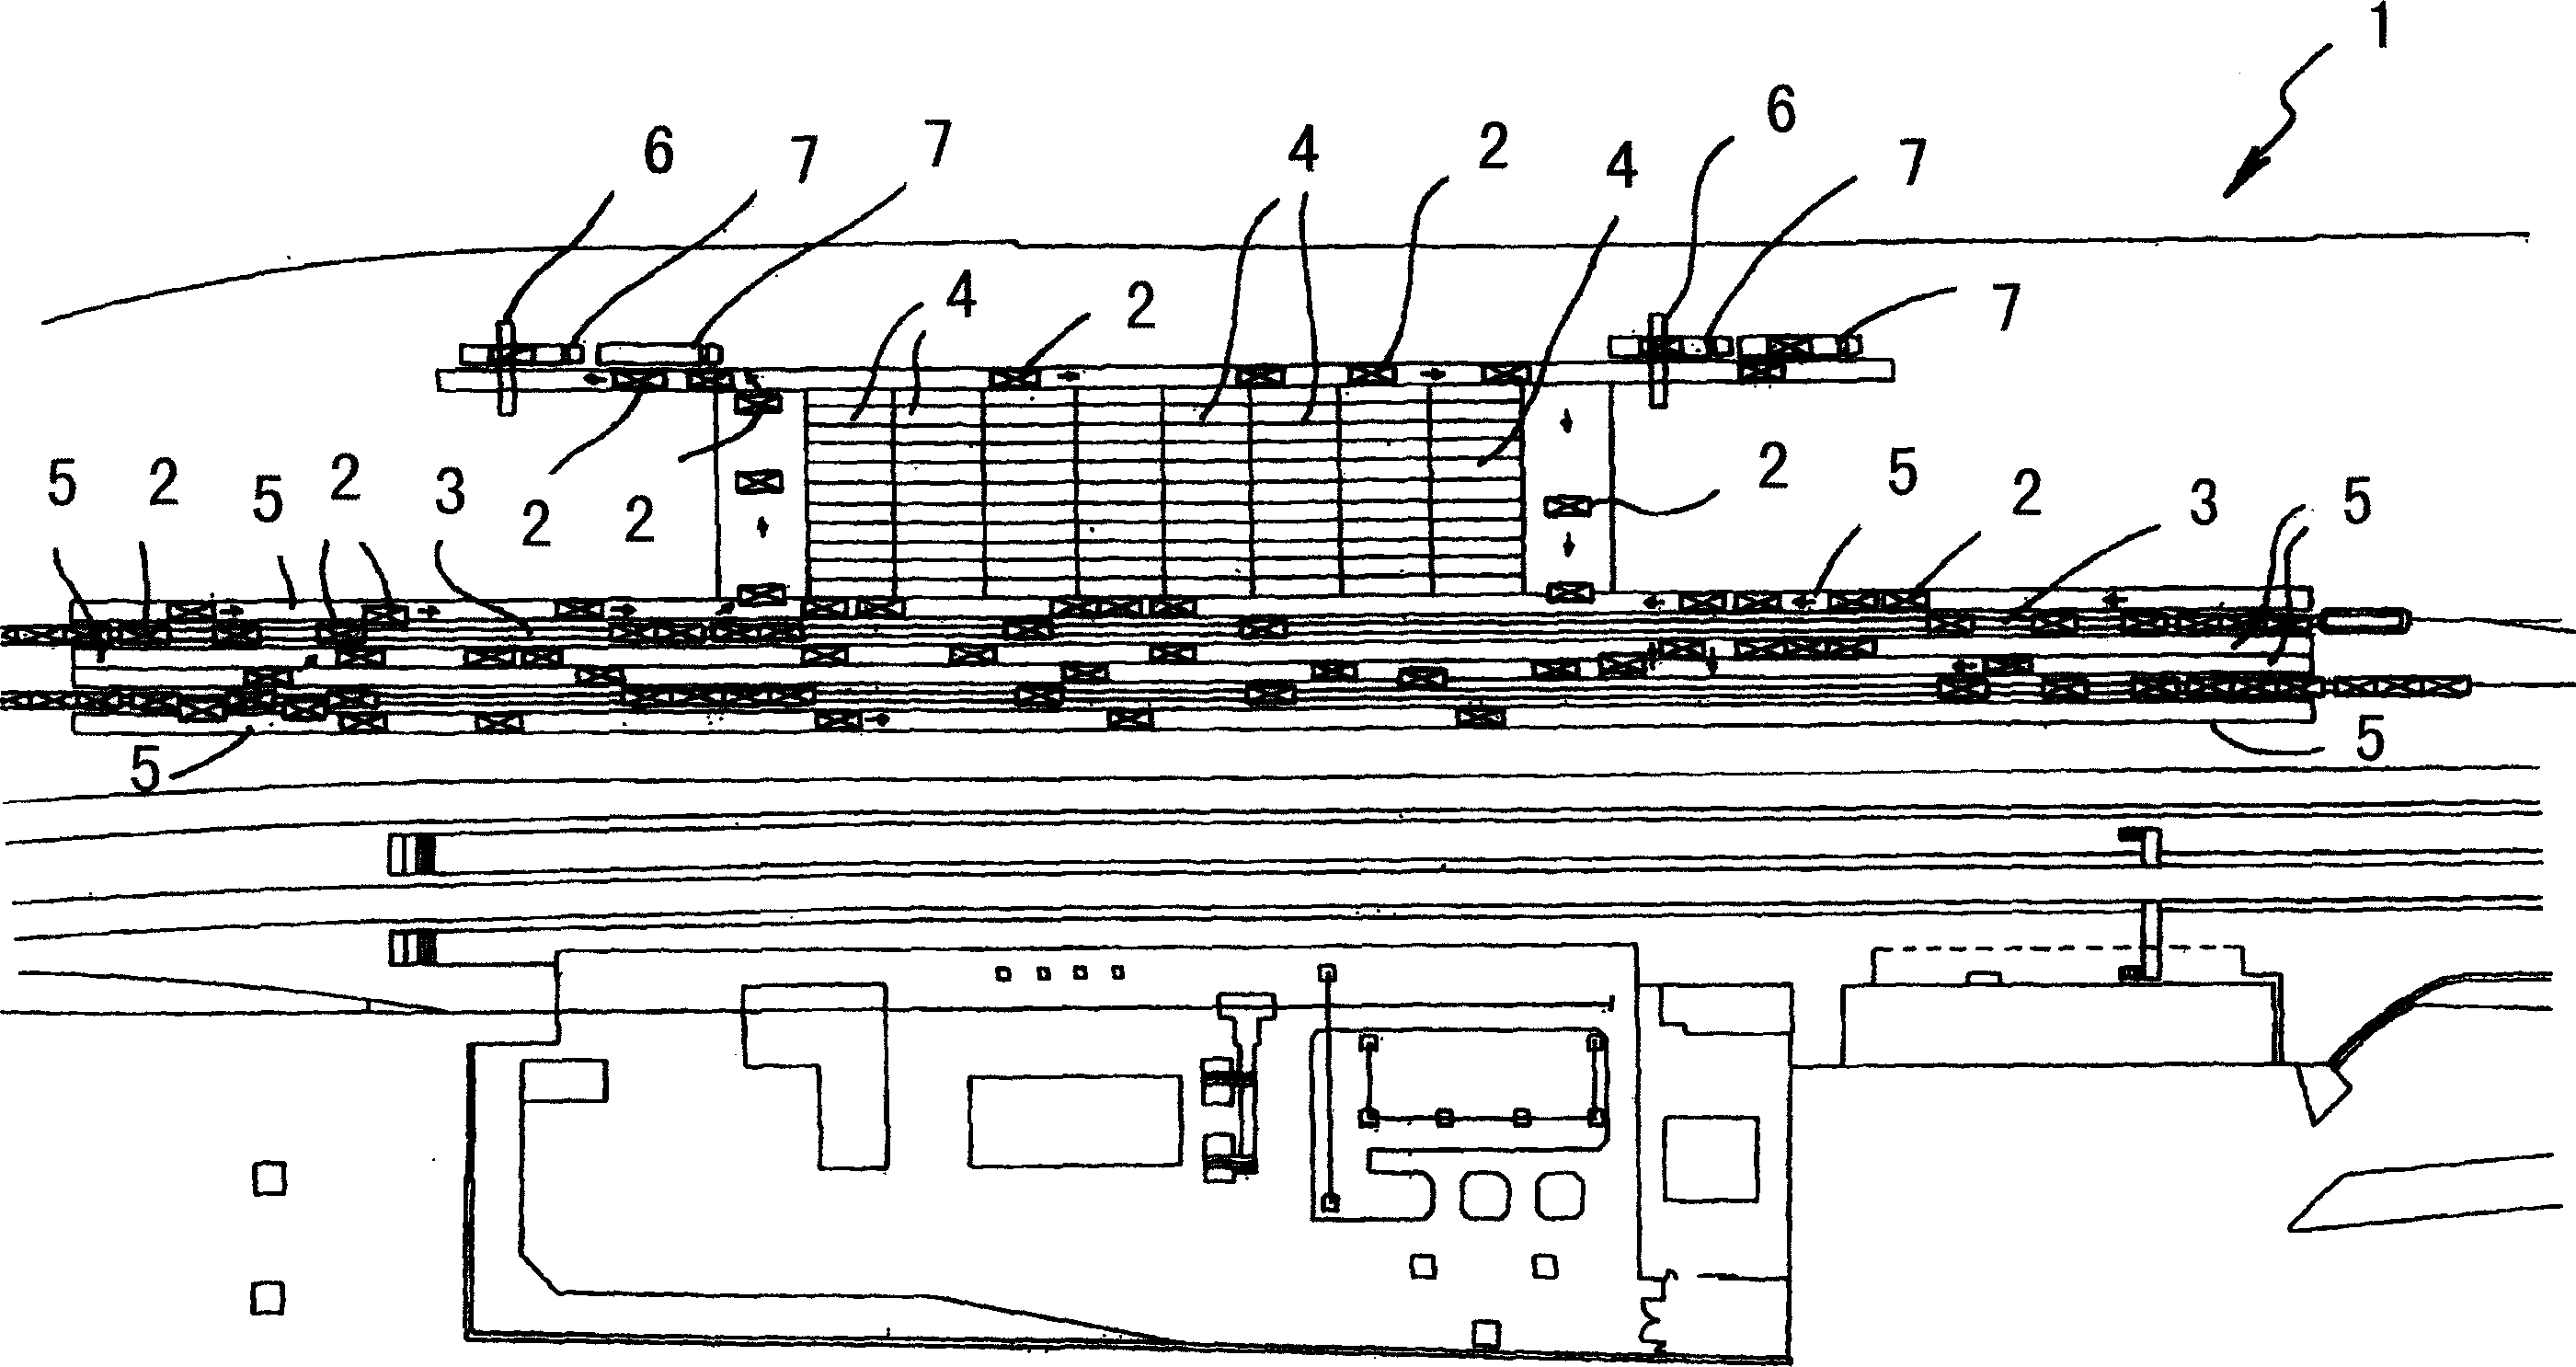 Method for railroad transport and apparatus for loading and unloading trains